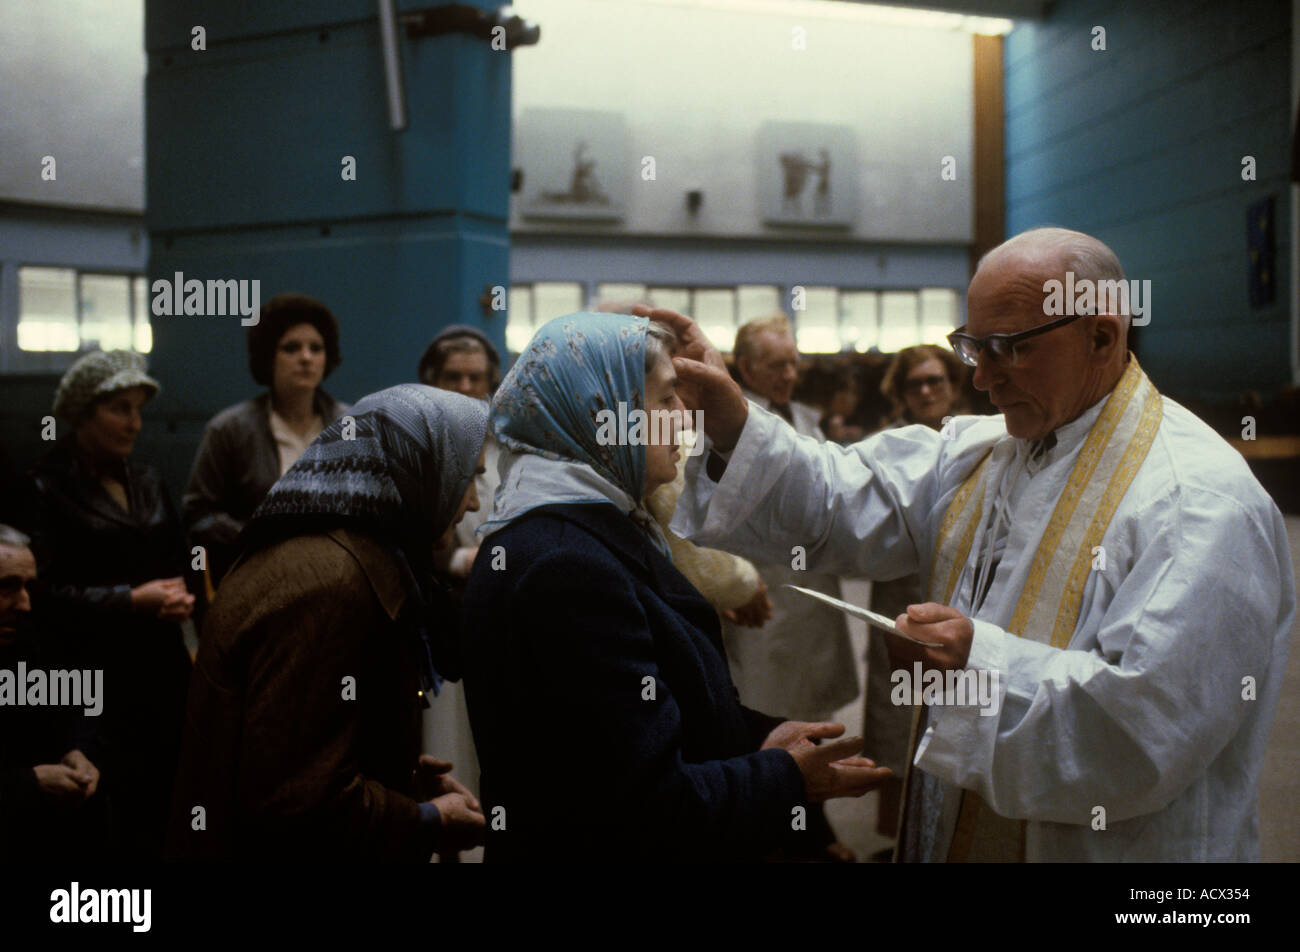 Catholic church service 1970s Ireland Knock. Women in congregation receive a blessing from the priest Holy Communion 1979 Eire HOMER SYKES Stock Photo